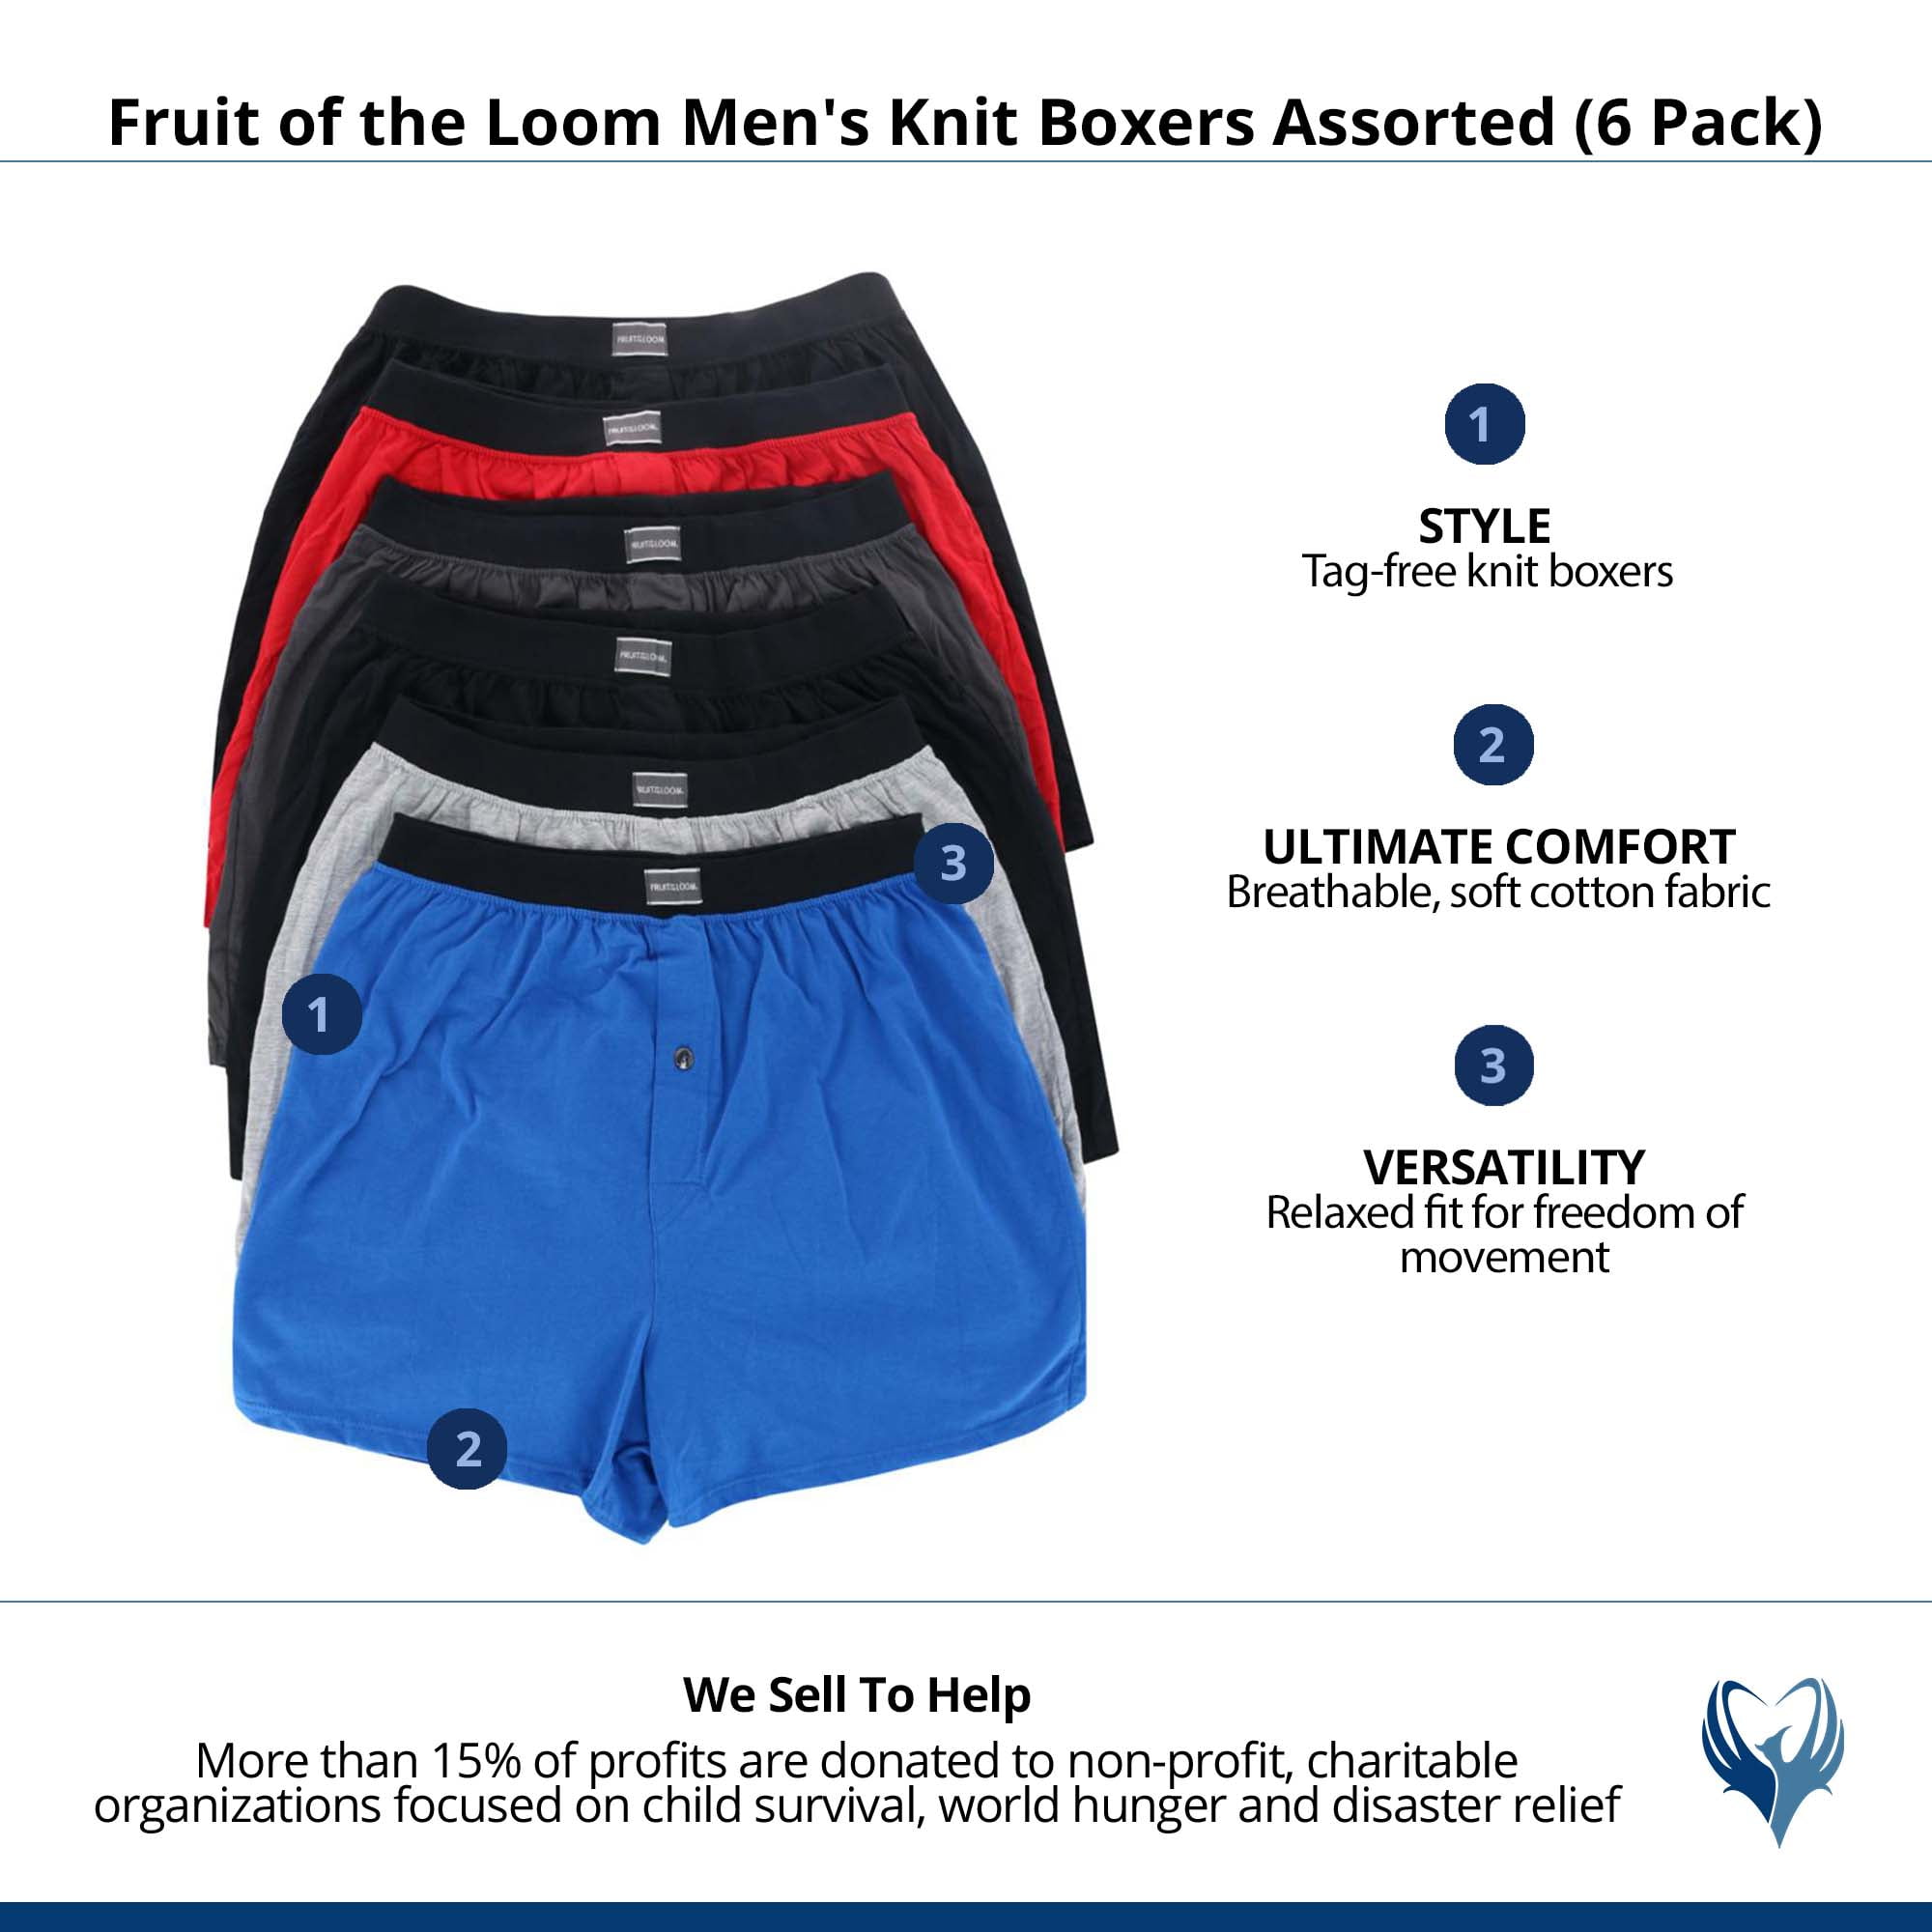 Fruit of the Loom Men's Knit Boxers, 6 Pack